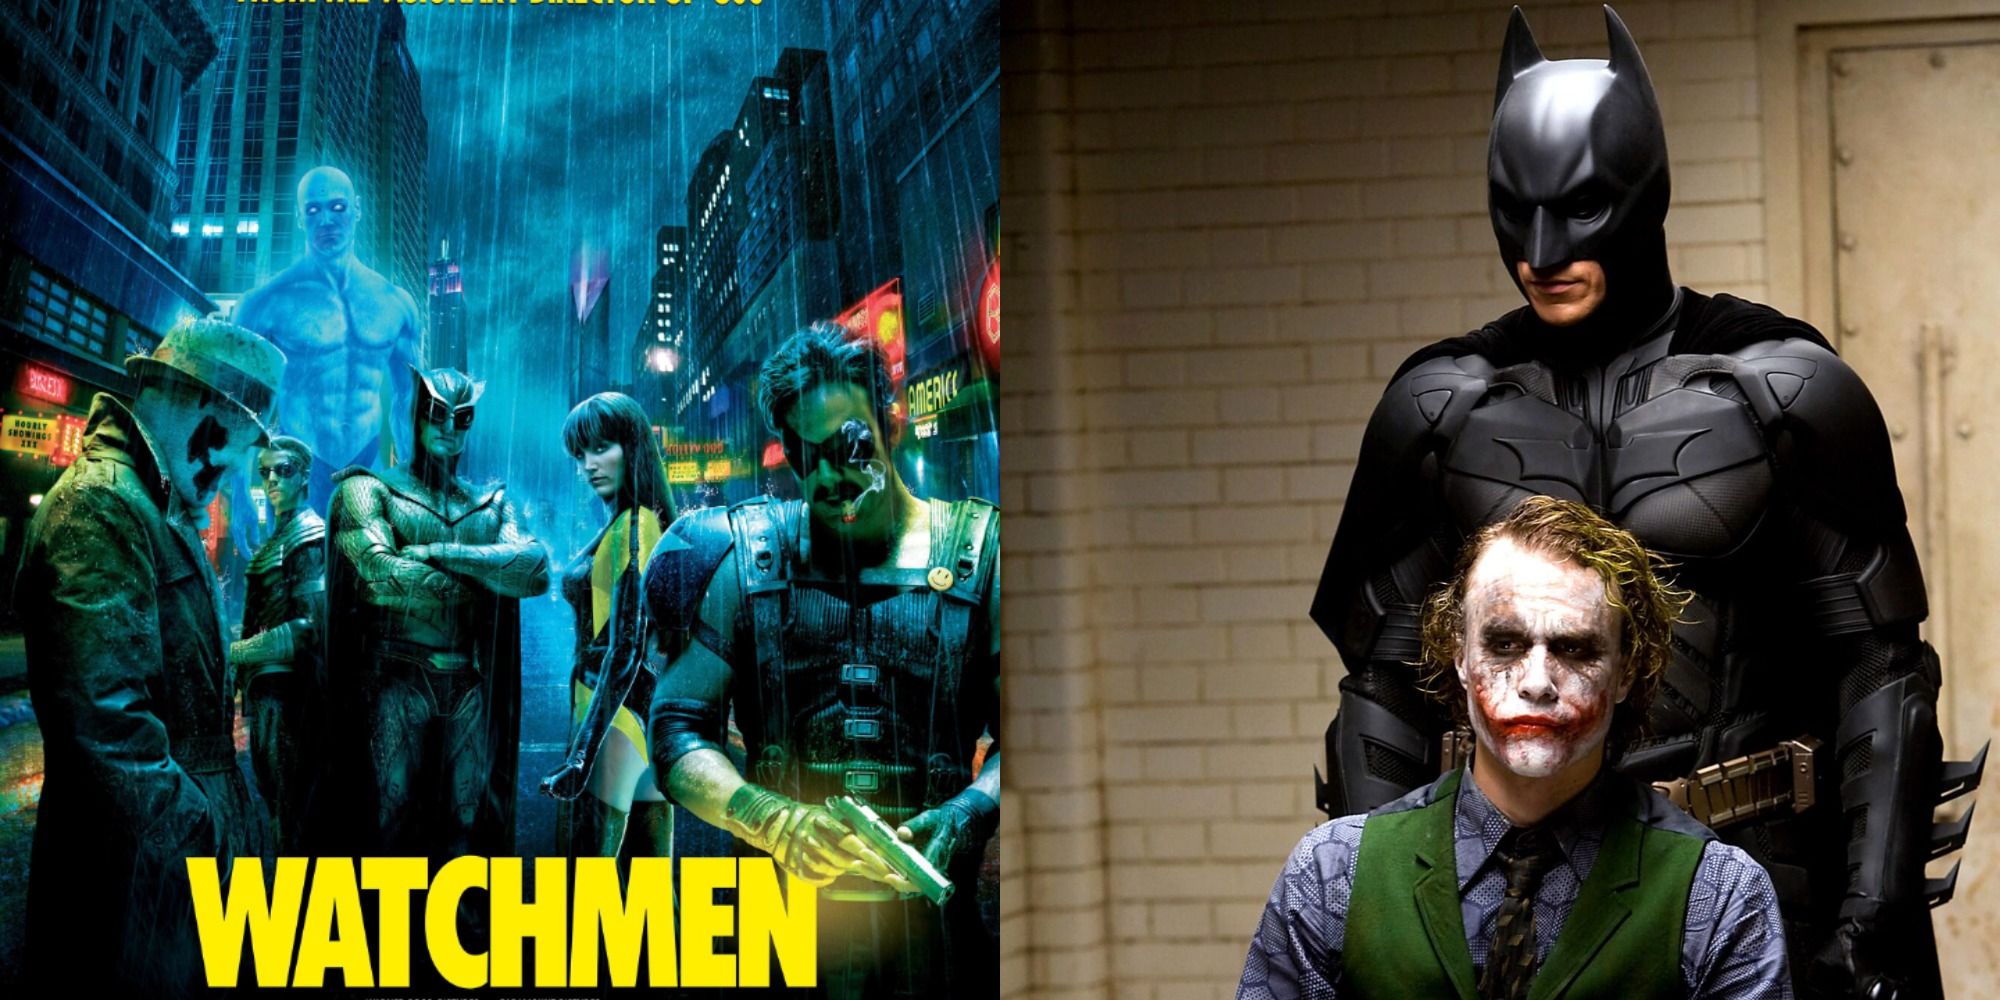 A split image of the Watchmen movie poster and Batman and Joker in the interrogation room